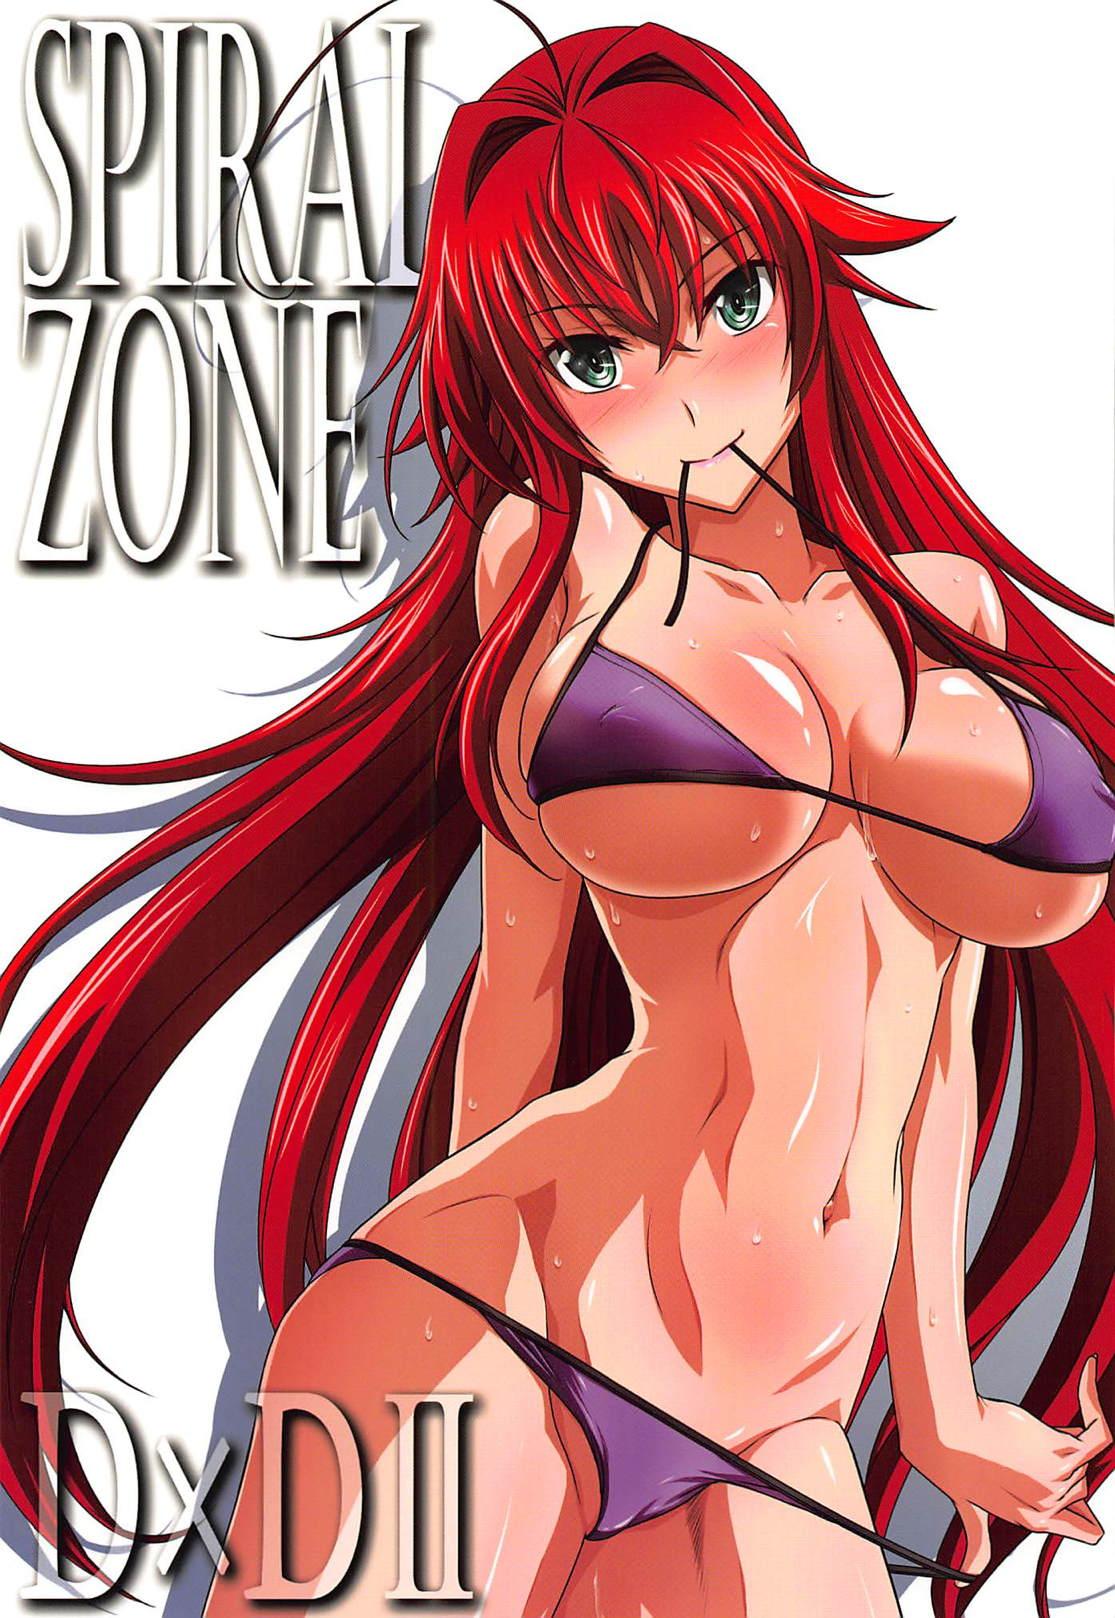 Tranny Porn SPIRAL ZONE DxD II - Highschool dxd Butt - Page 1